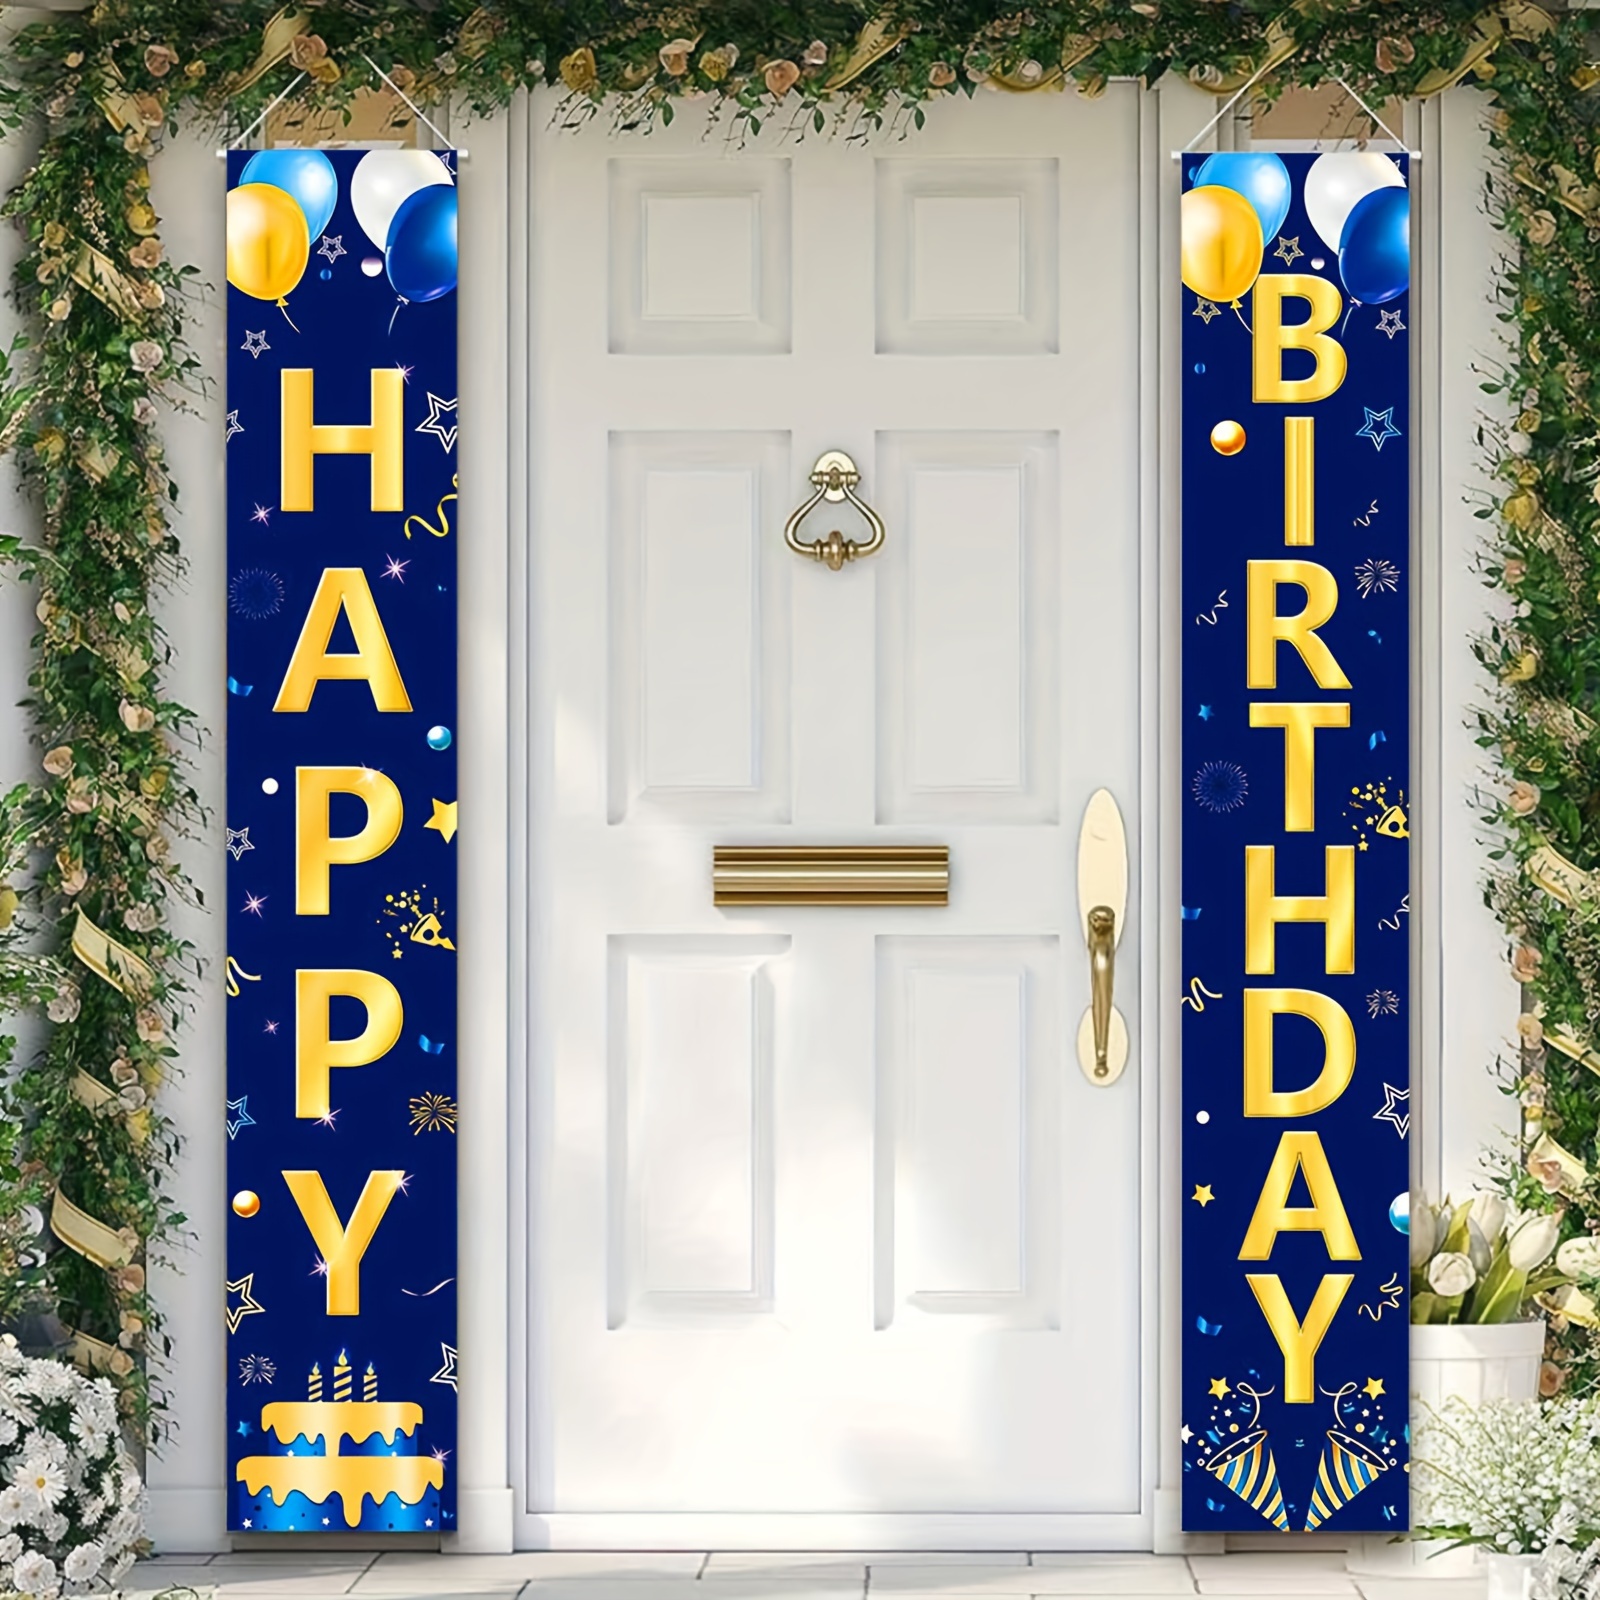 

Navy Blue And Gold Birthday Decorations, Polyester Entryway Door Banners Set For Men, Happy Birthday Porch Sign, Blue & Gold Party Props For Outdoor Indoor Celebration Decor, Pack Of 2